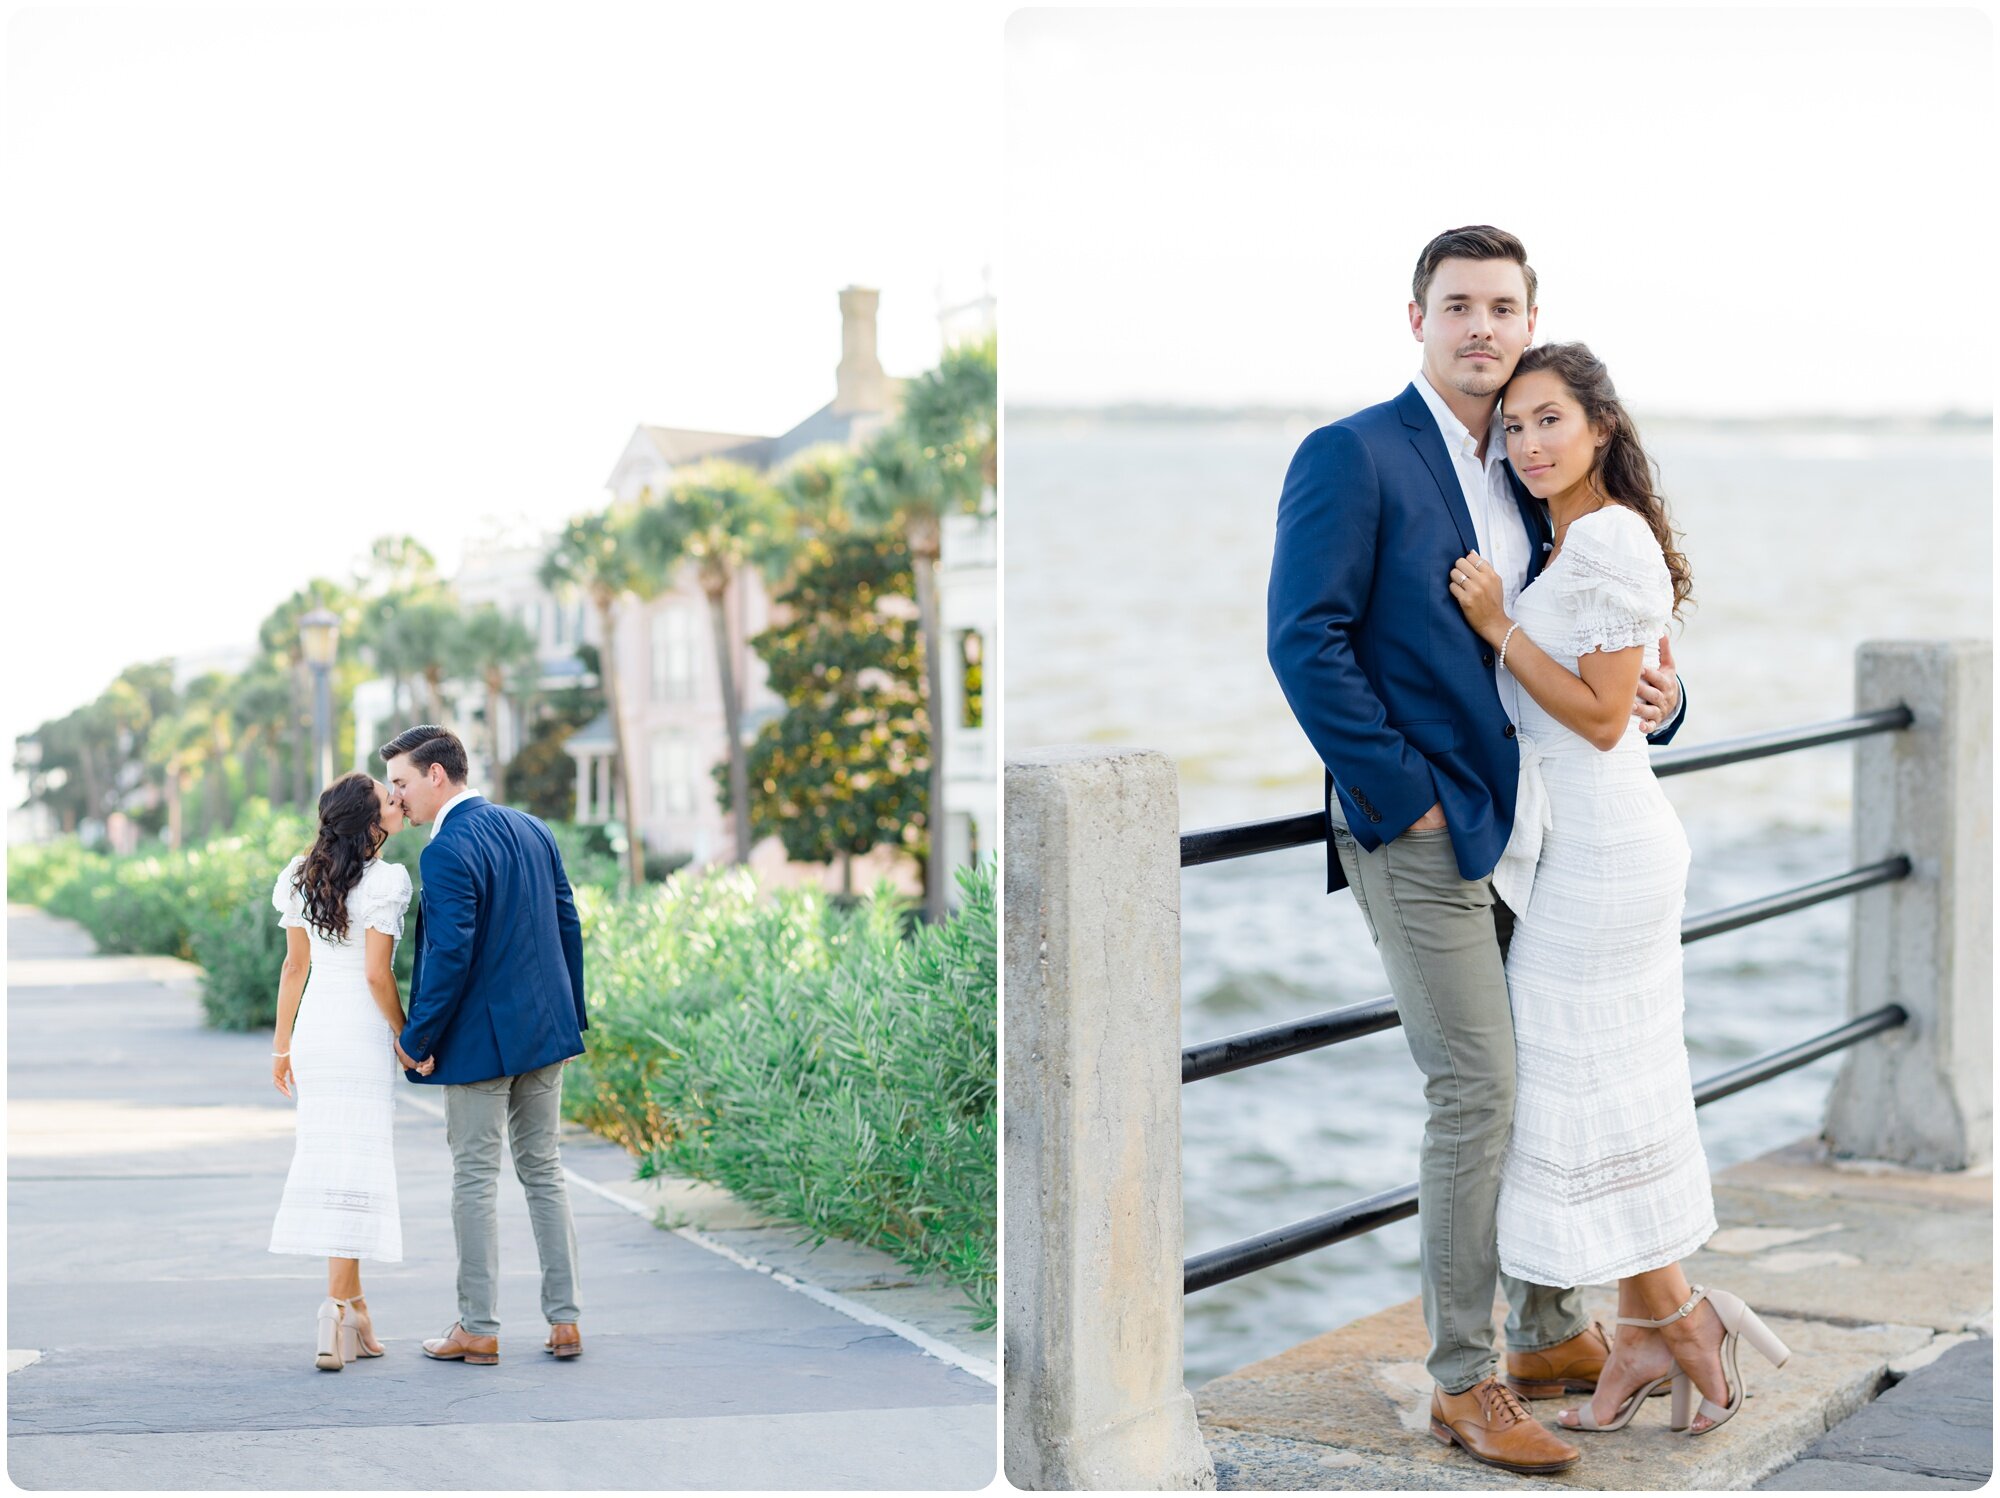 outdoor_engagement_session_candid_natural_charleston_destination_wedding_rainbow_row_colorful_kailee_dimeglio_photography_0011.jpg